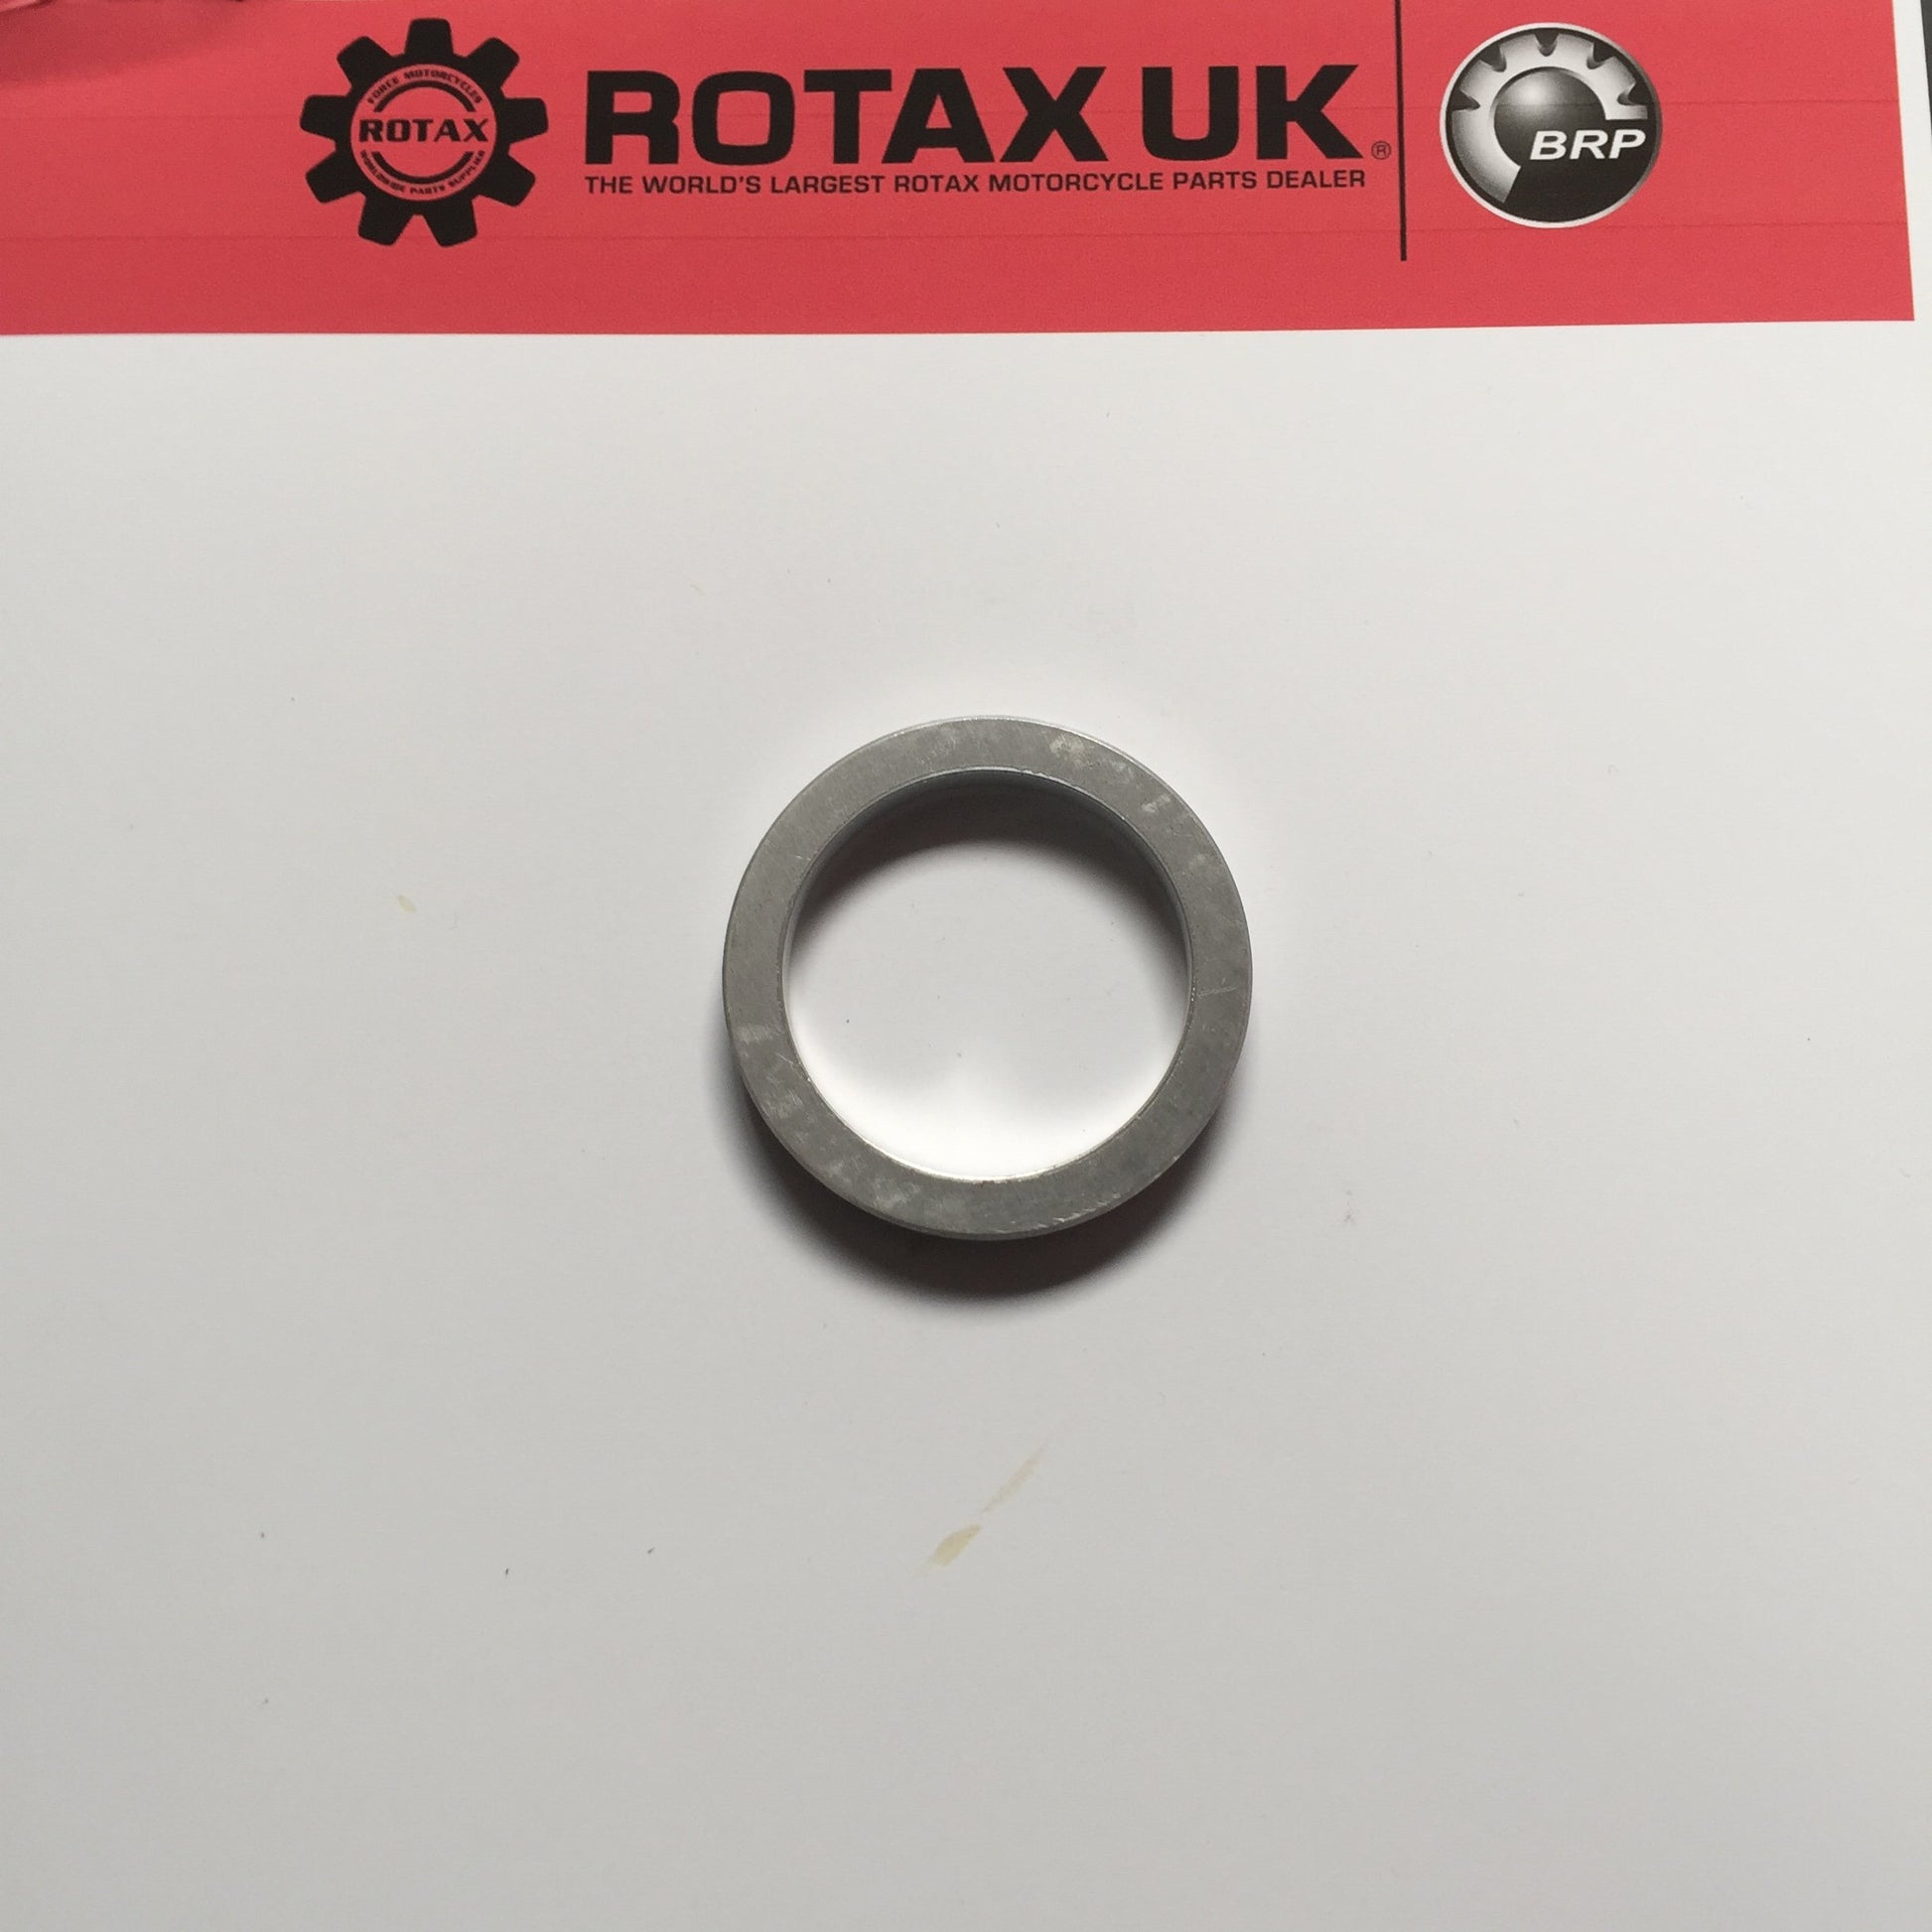 227190 - Oil Seal Holding Ring for engine types: 128, 130, 256.